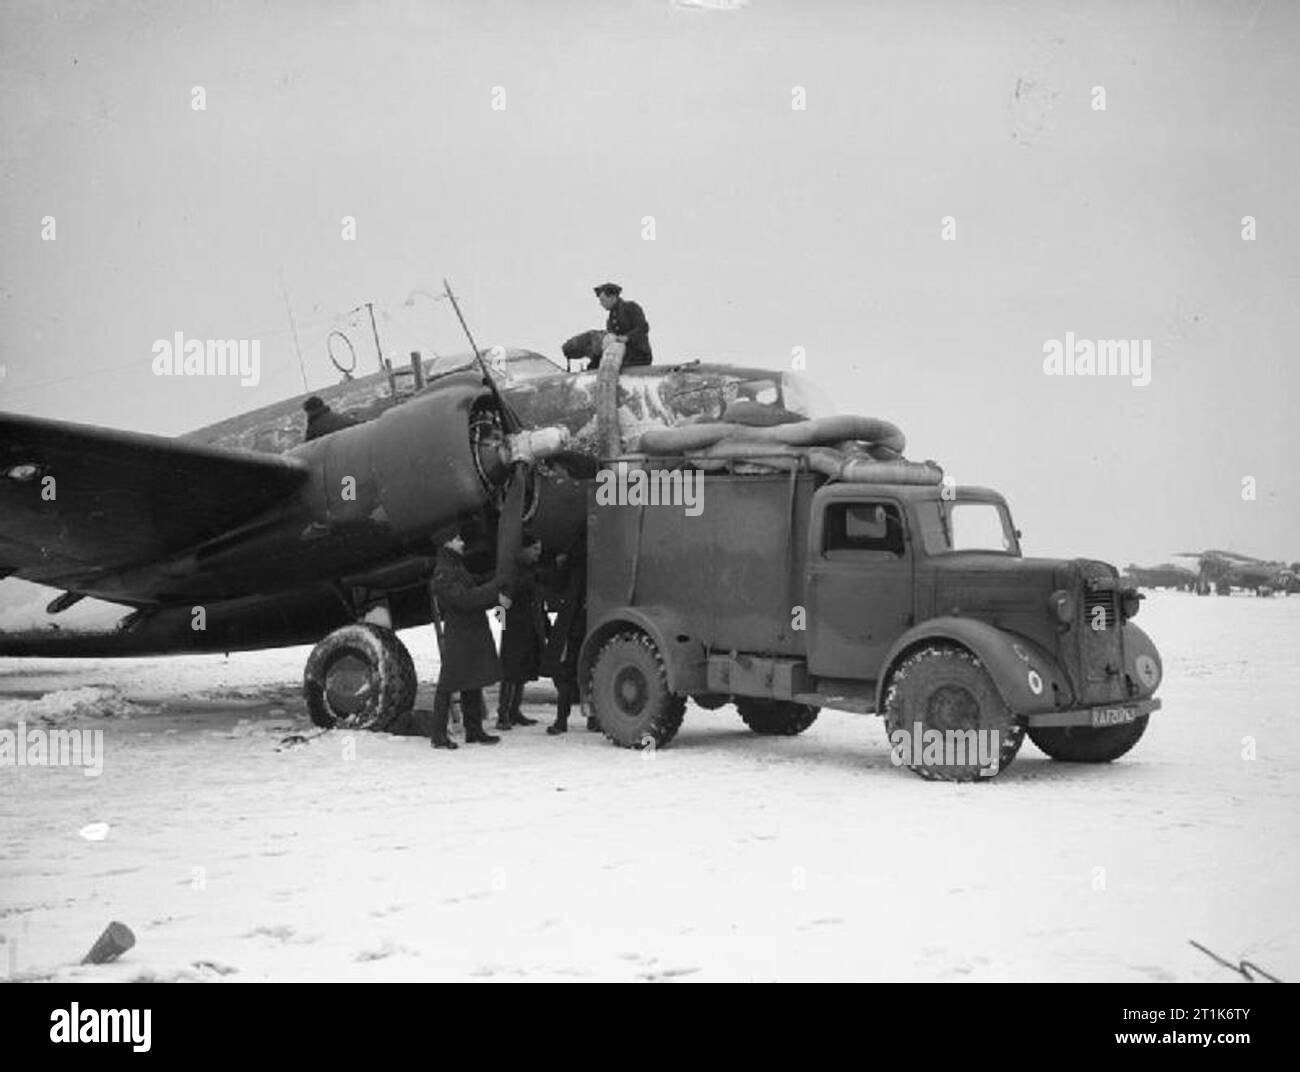 Royal Air Force 1939-1945- Coastal Command Ground staff prepare a No. 233 Squadron Hudson for flight in freezing conditions at Thorney Island, 19 January 1942. The 'hot air van' has been brought in to warm up the engines and de-ice the cockpit windscreen. Stock Photo